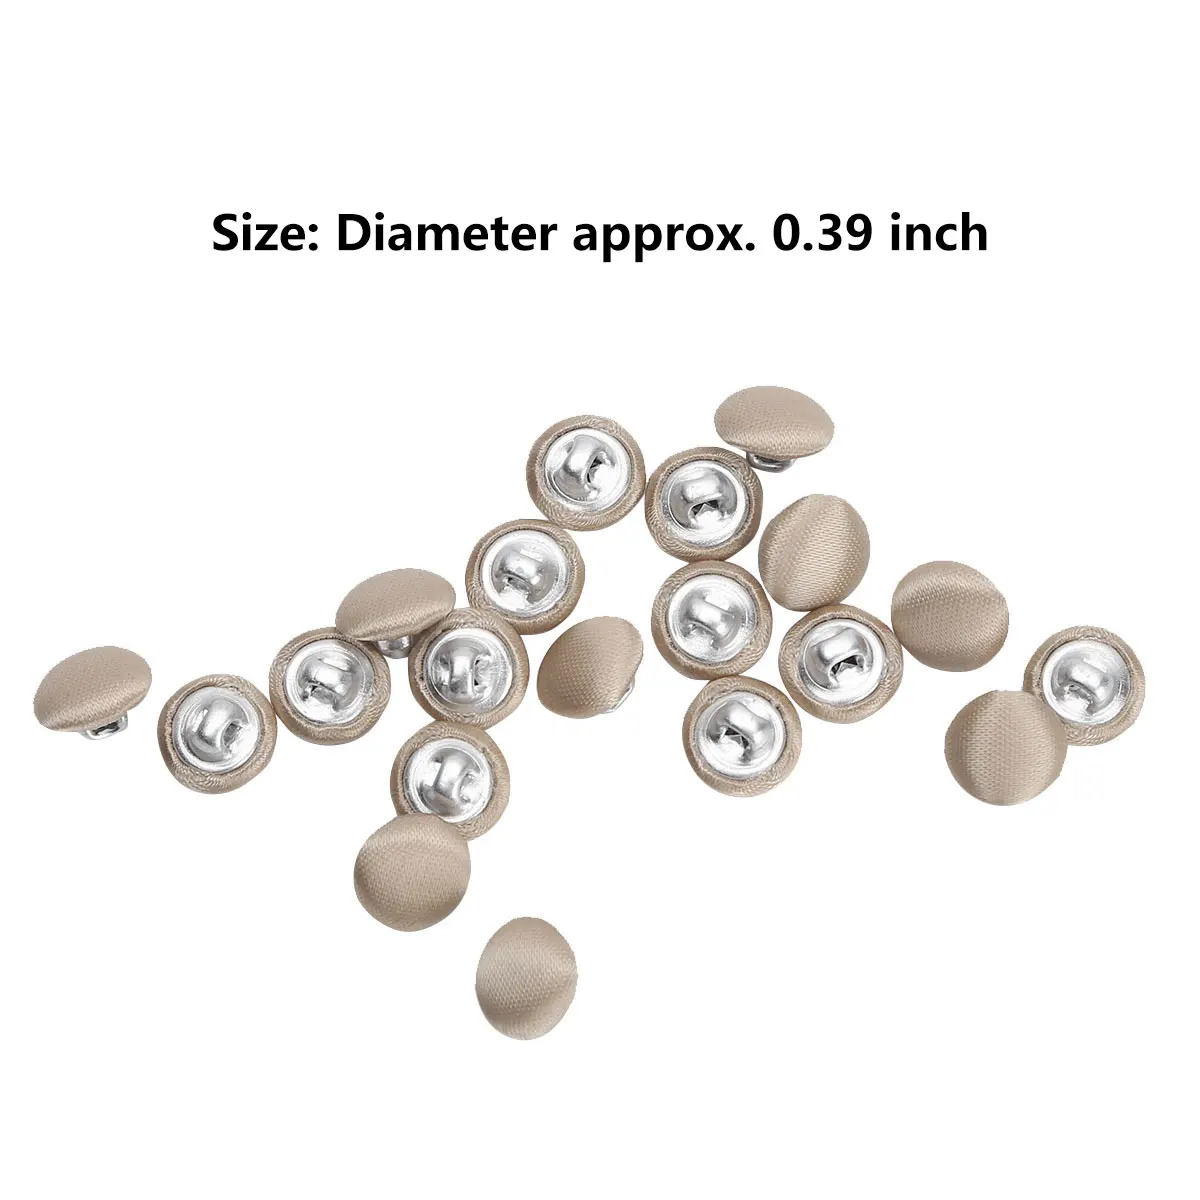 20 Buttons for Clothing Smooth Satin Covered Round Shank Button Mini Tuxedo Gown Decorative DIY Sewing Metal Button Accessories